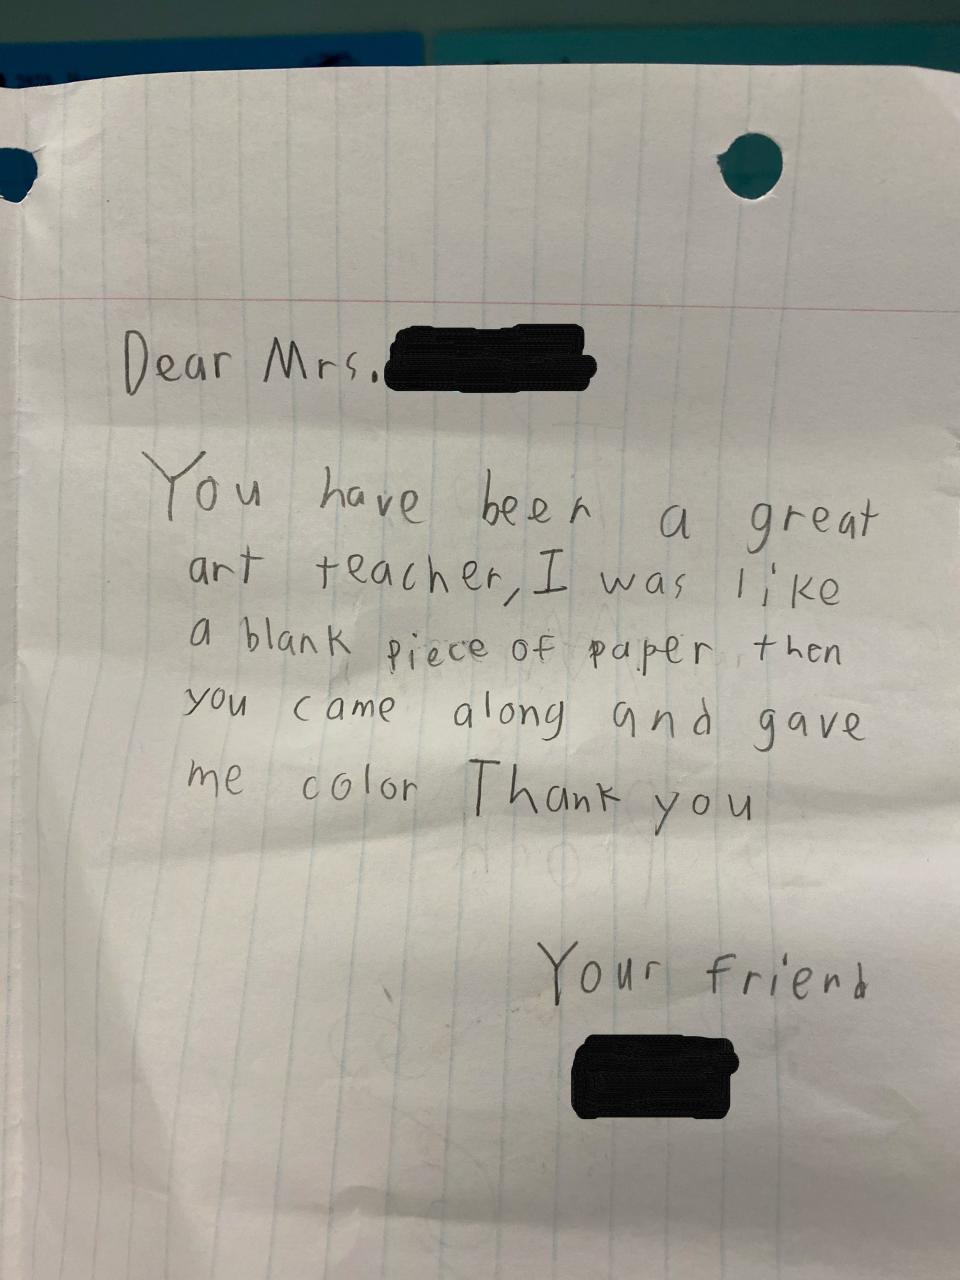 Handwritten note to a teacher: "You have been a great art teacher,  I was like a blank piece of paper then you came along and gave me color, thank you, your friend"